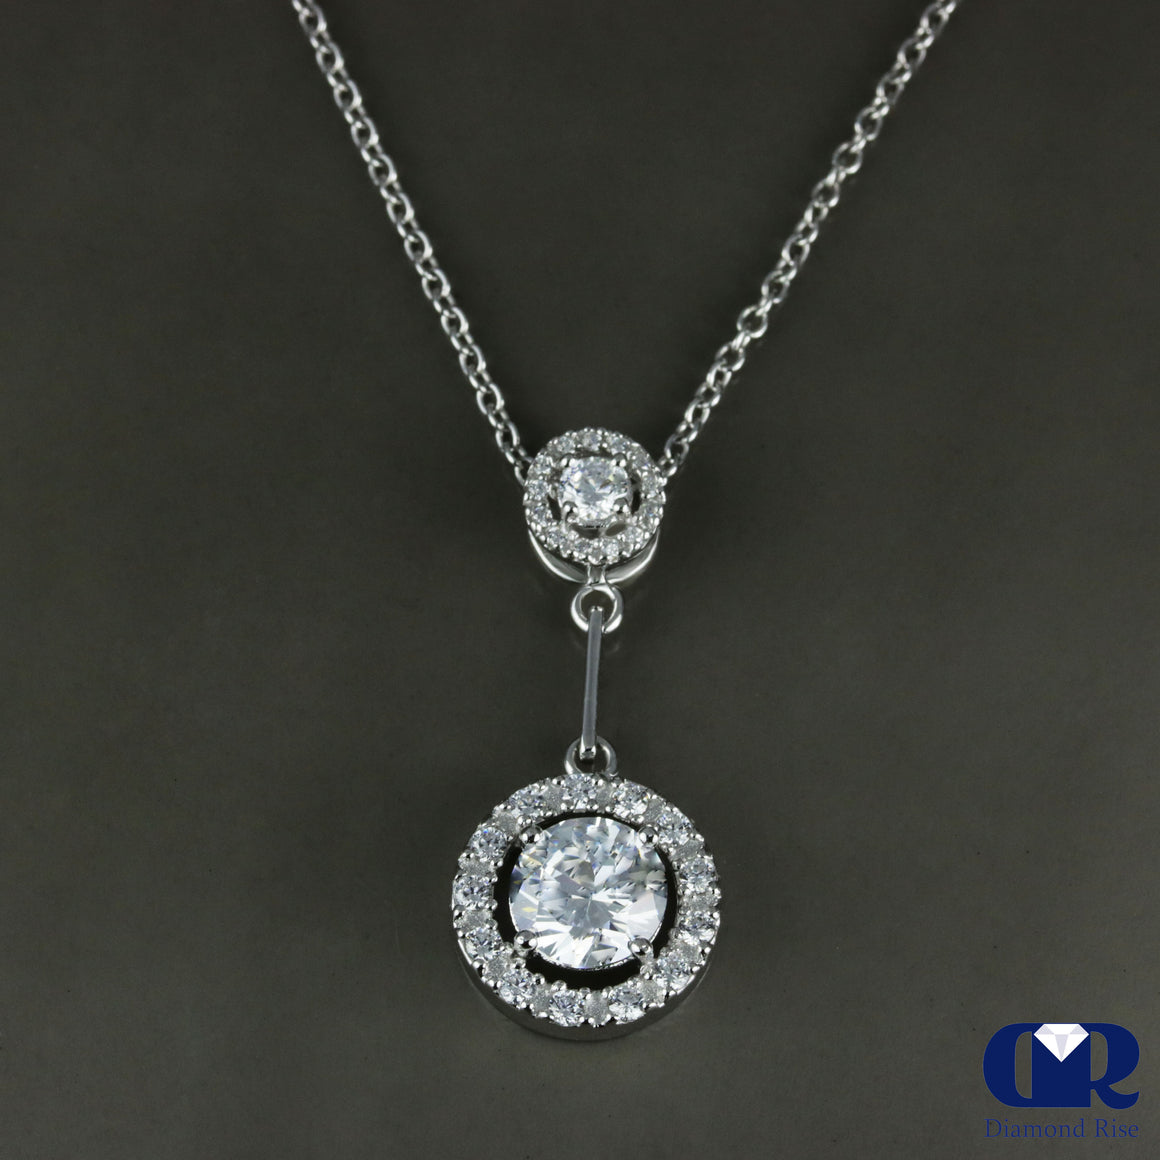 2.89 Natural Round Cut Diamond Pendant Necklace 14K Gold With Chain - Diamond Rise Jewelry